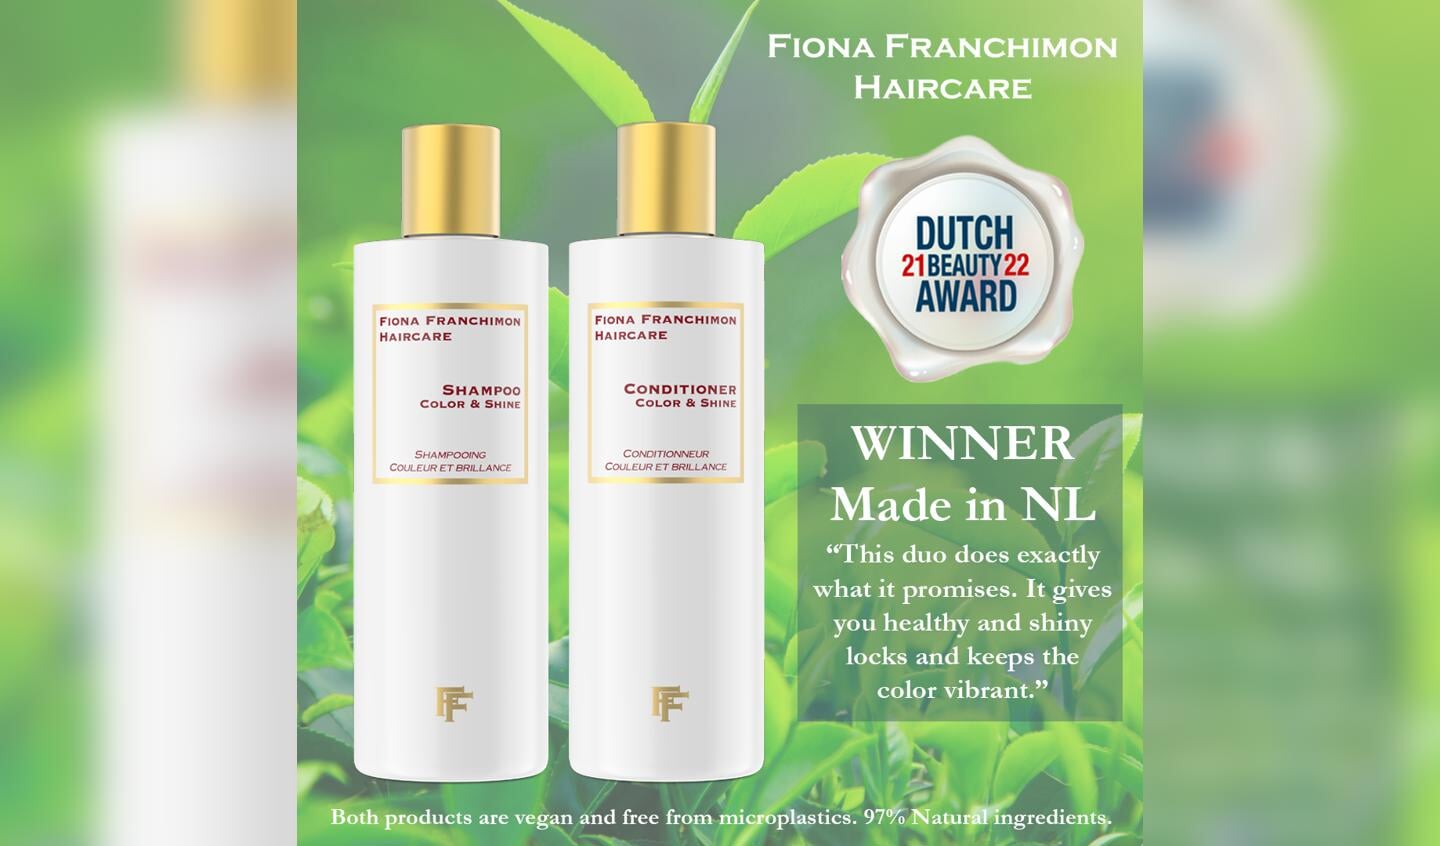 Fiona Franchimon met Color and Shine Shampoo & Conditioner